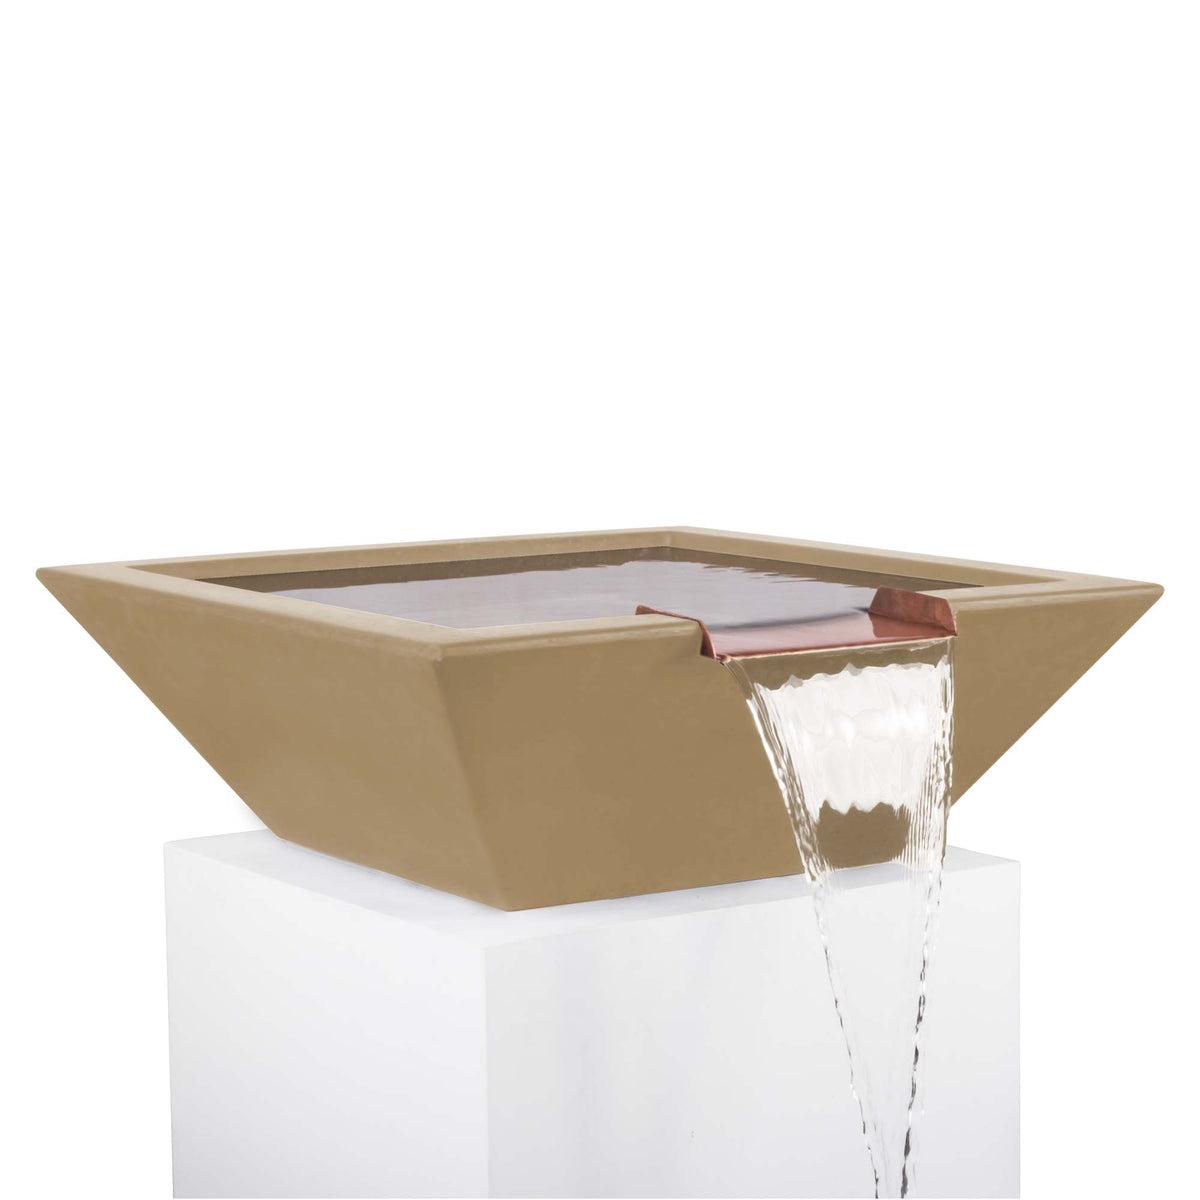 The Outdoor Plus Maya GFRC Concrete Square Water Bowl in Brown